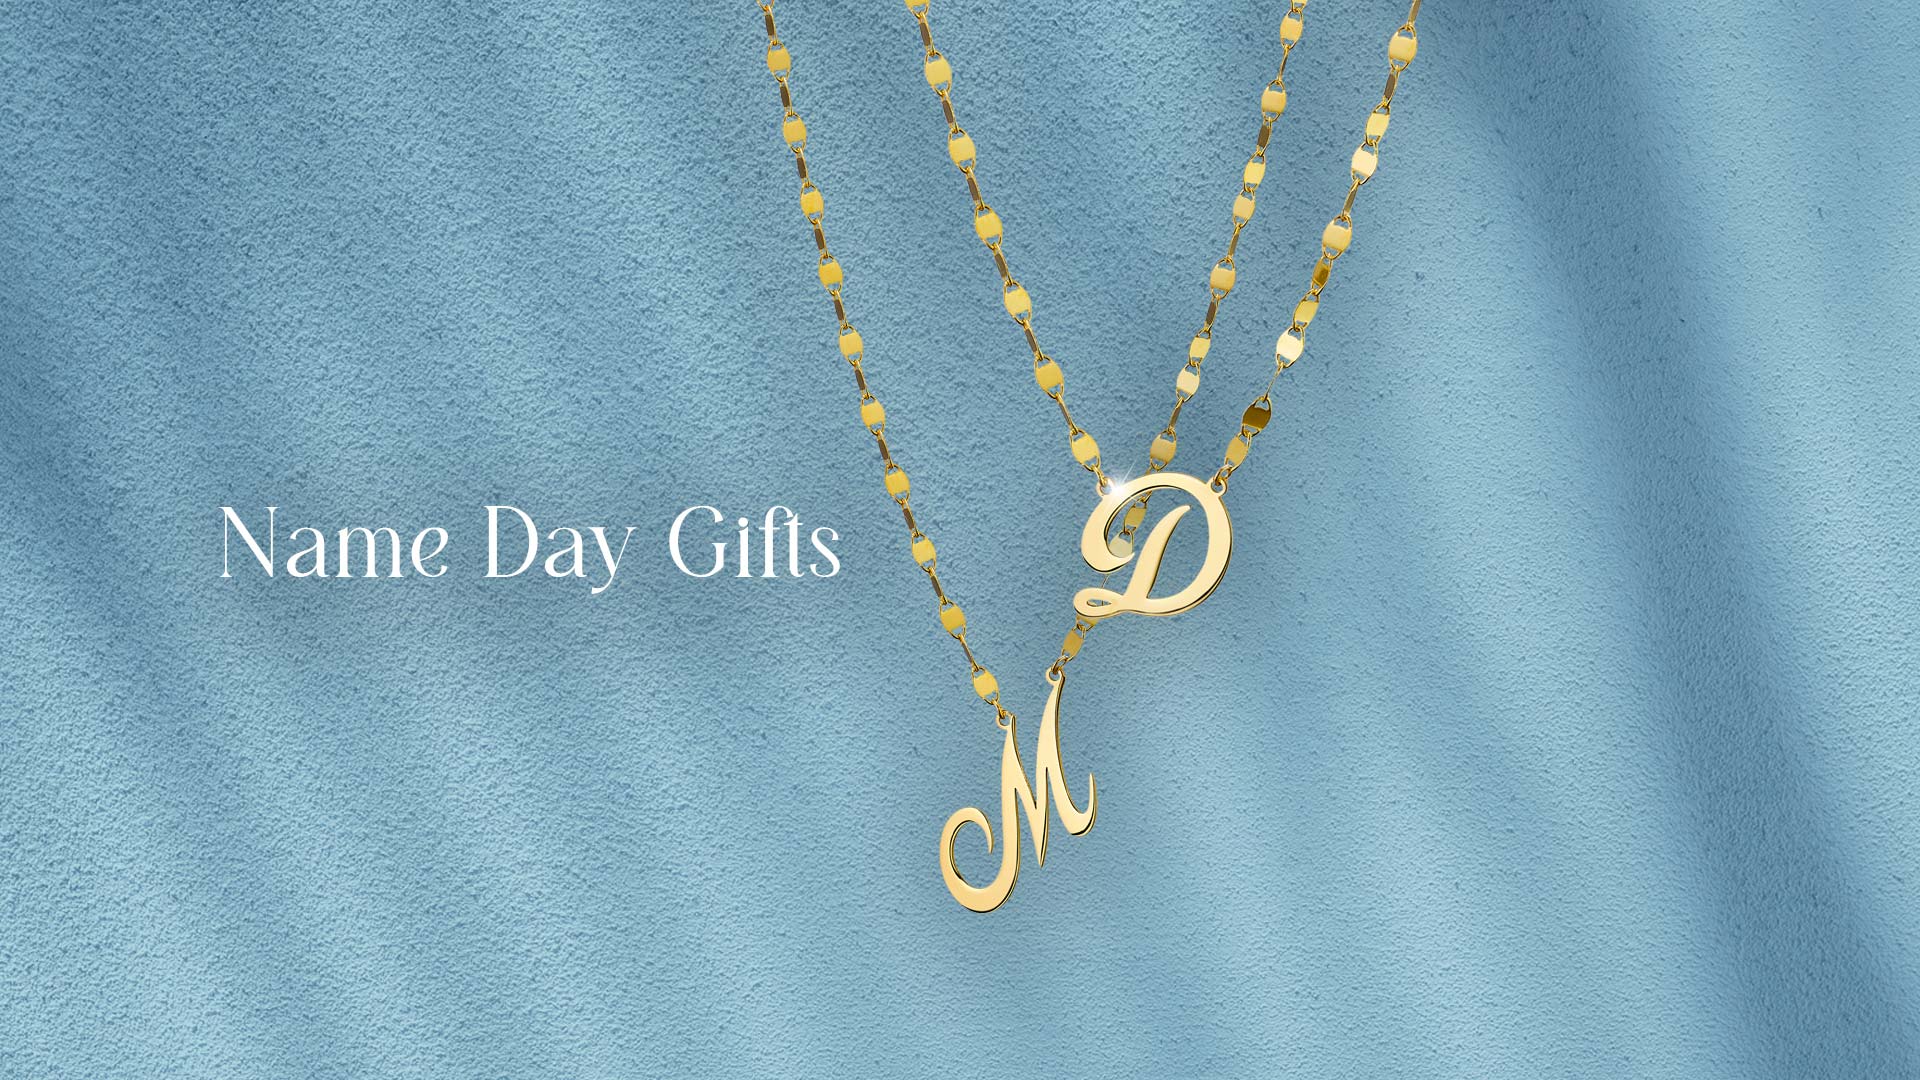 Name Day Gifts - Oxette